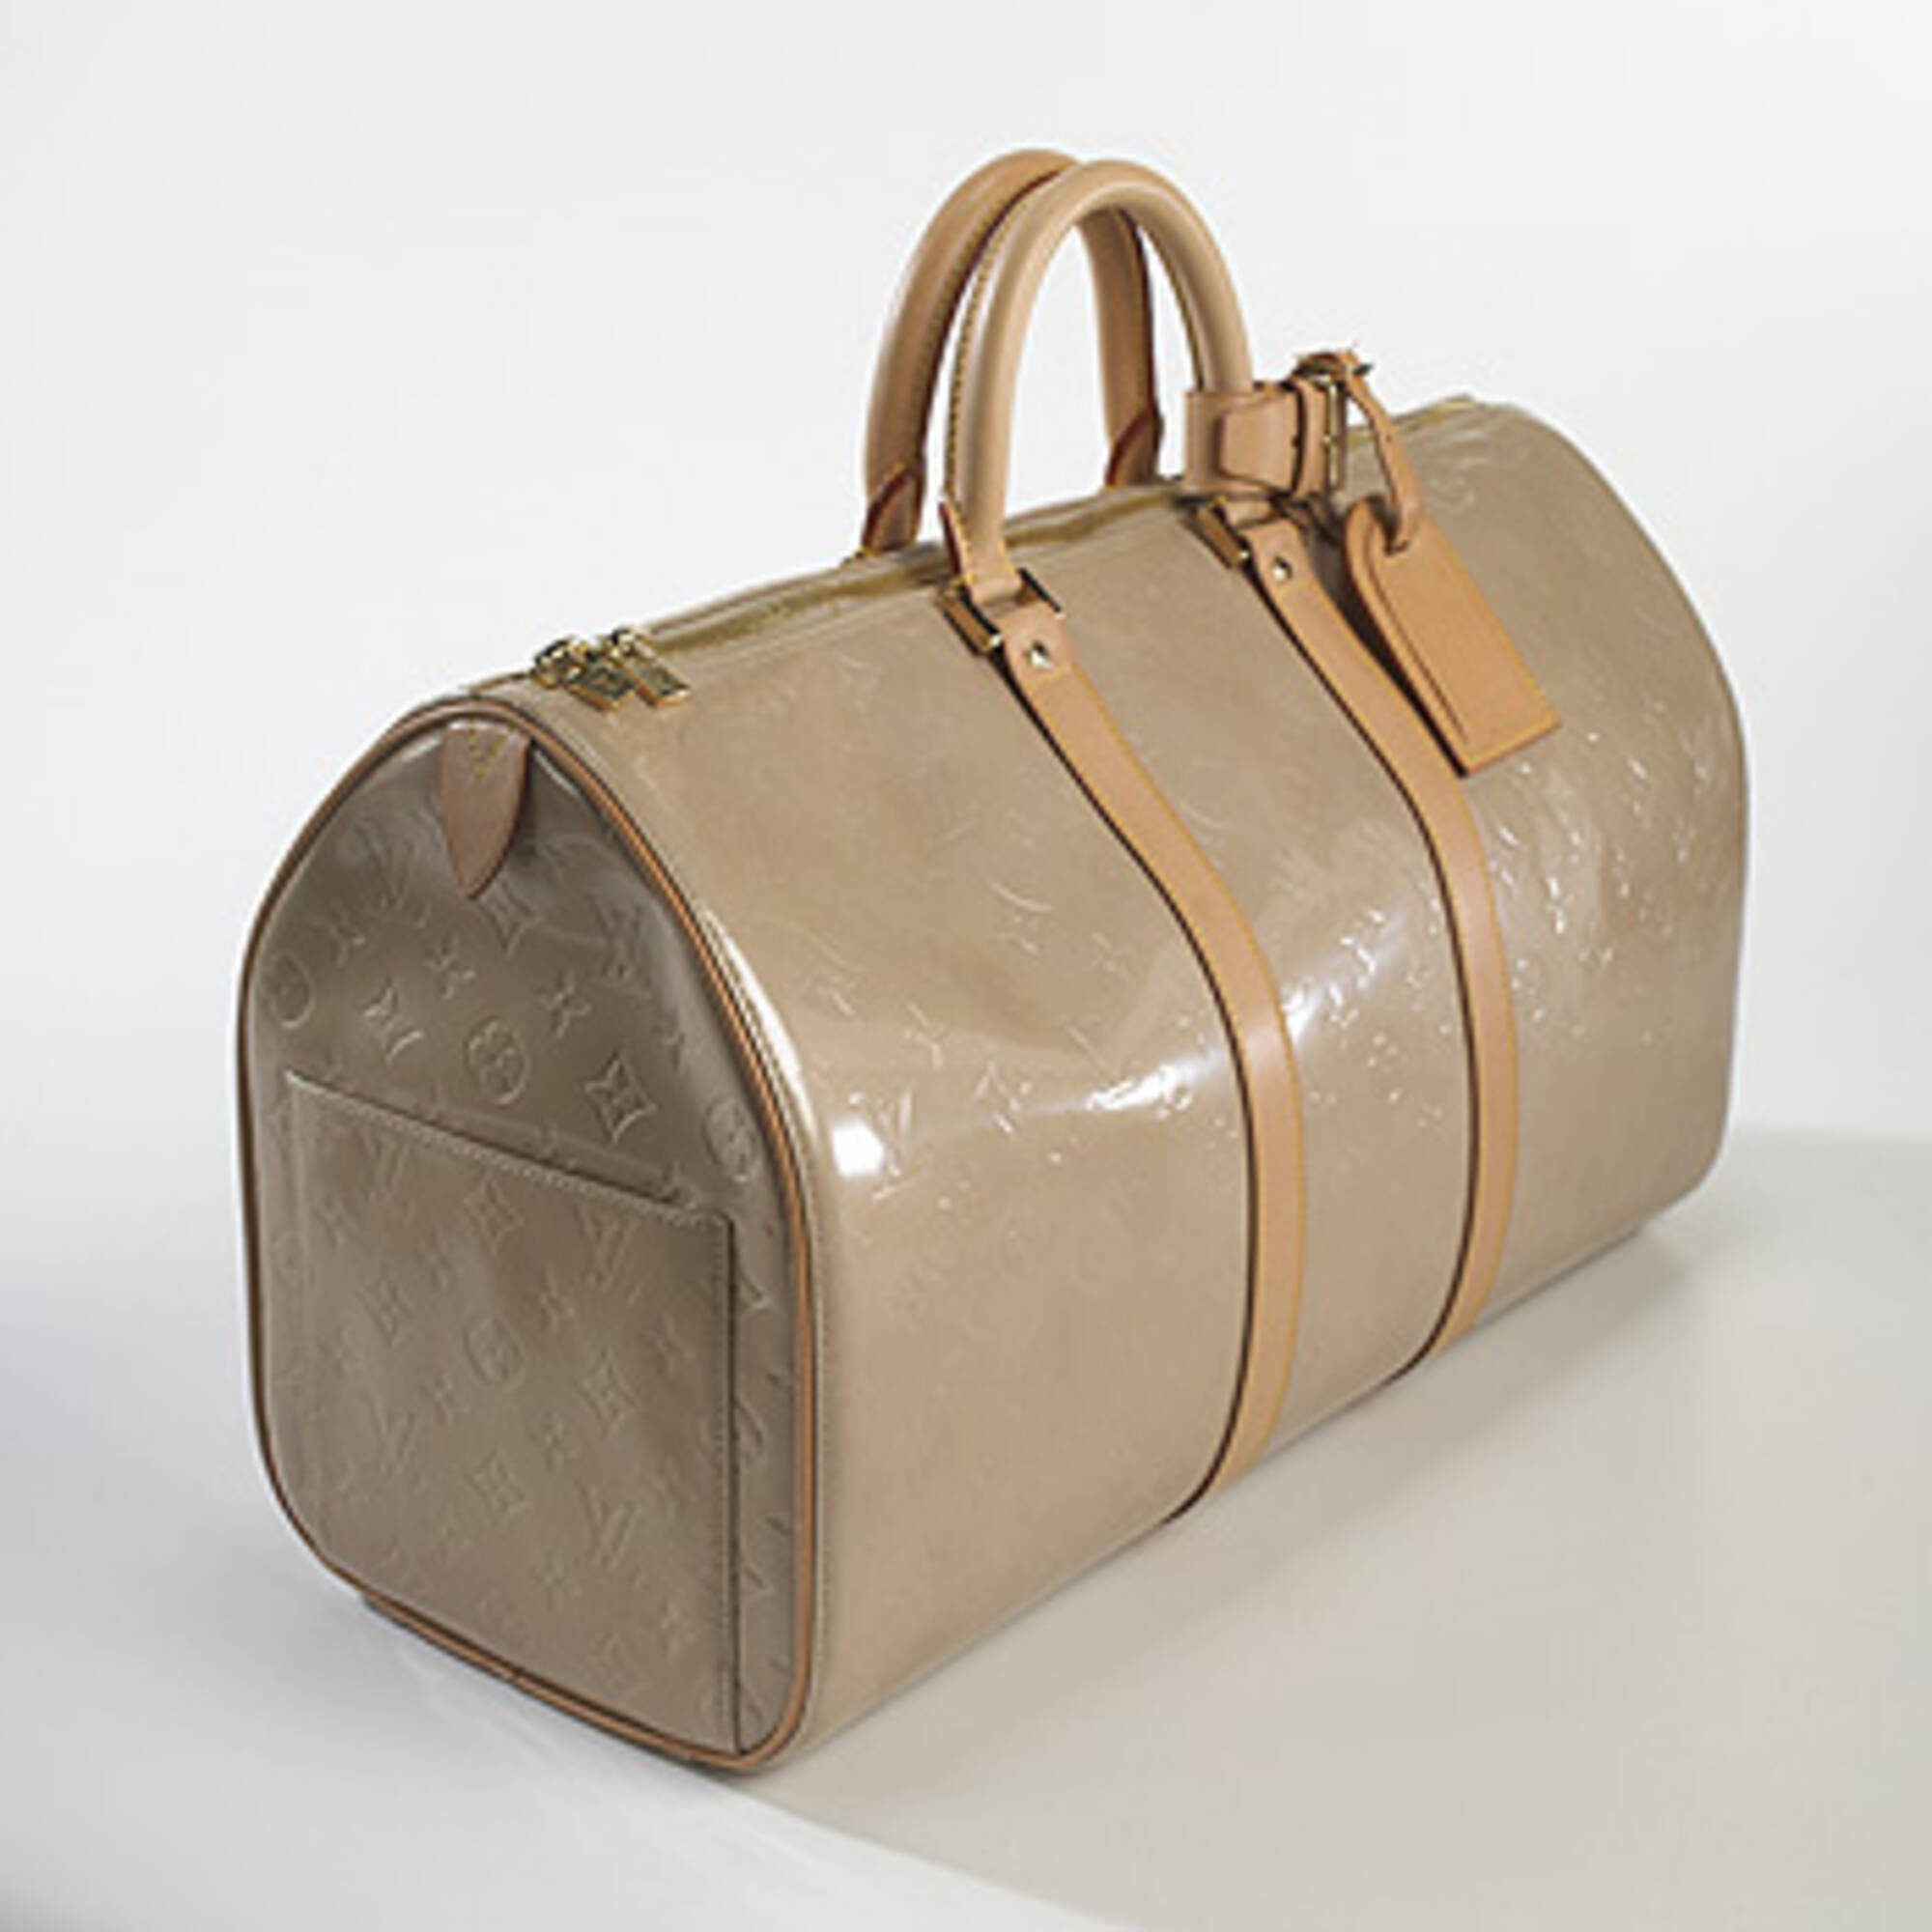 Sold at Auction: LOUIS VUITTON WEEKENDER BAG